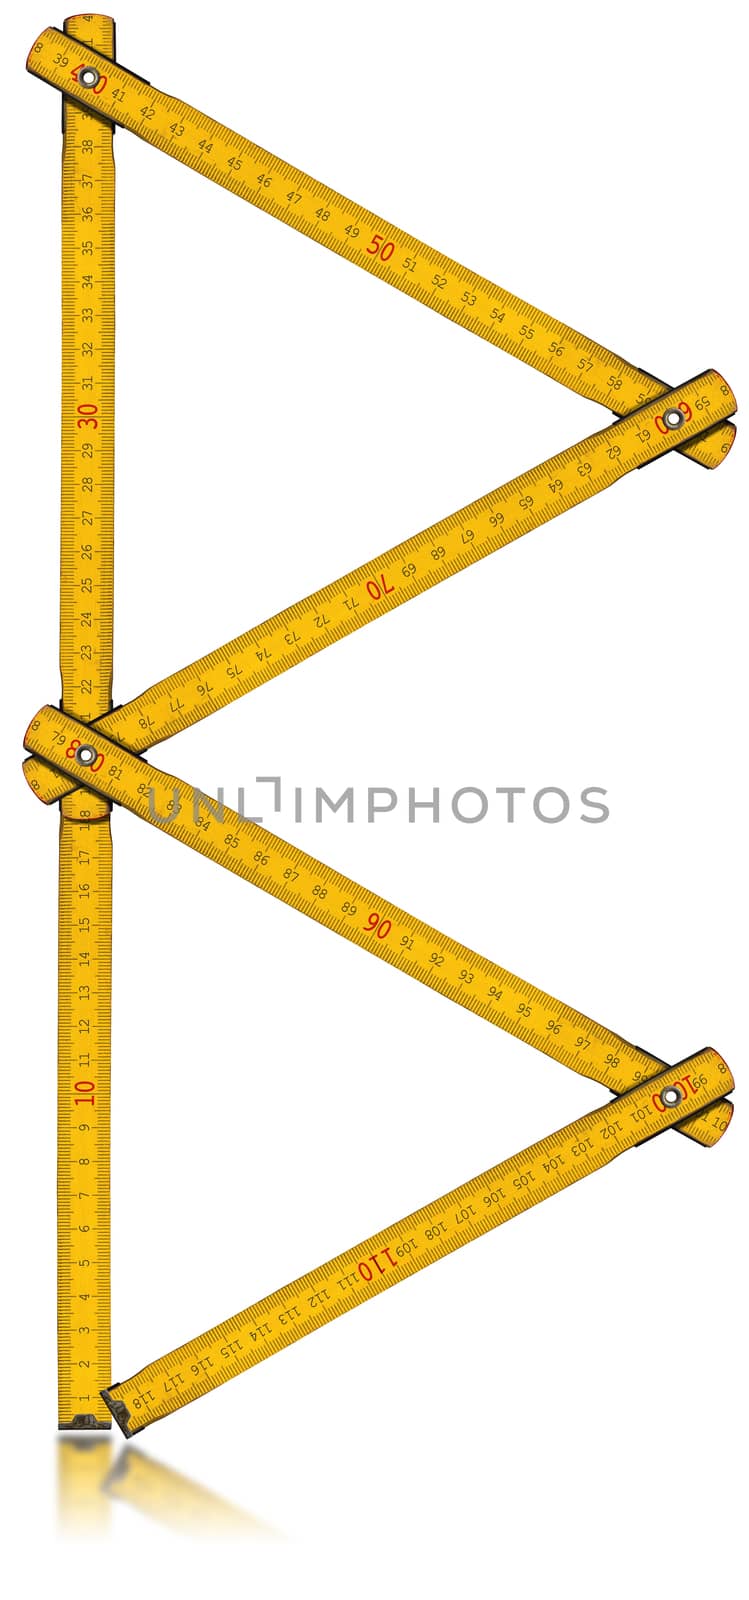 Old wooden yellow meter in the shape of letter B. Isolated on white background.